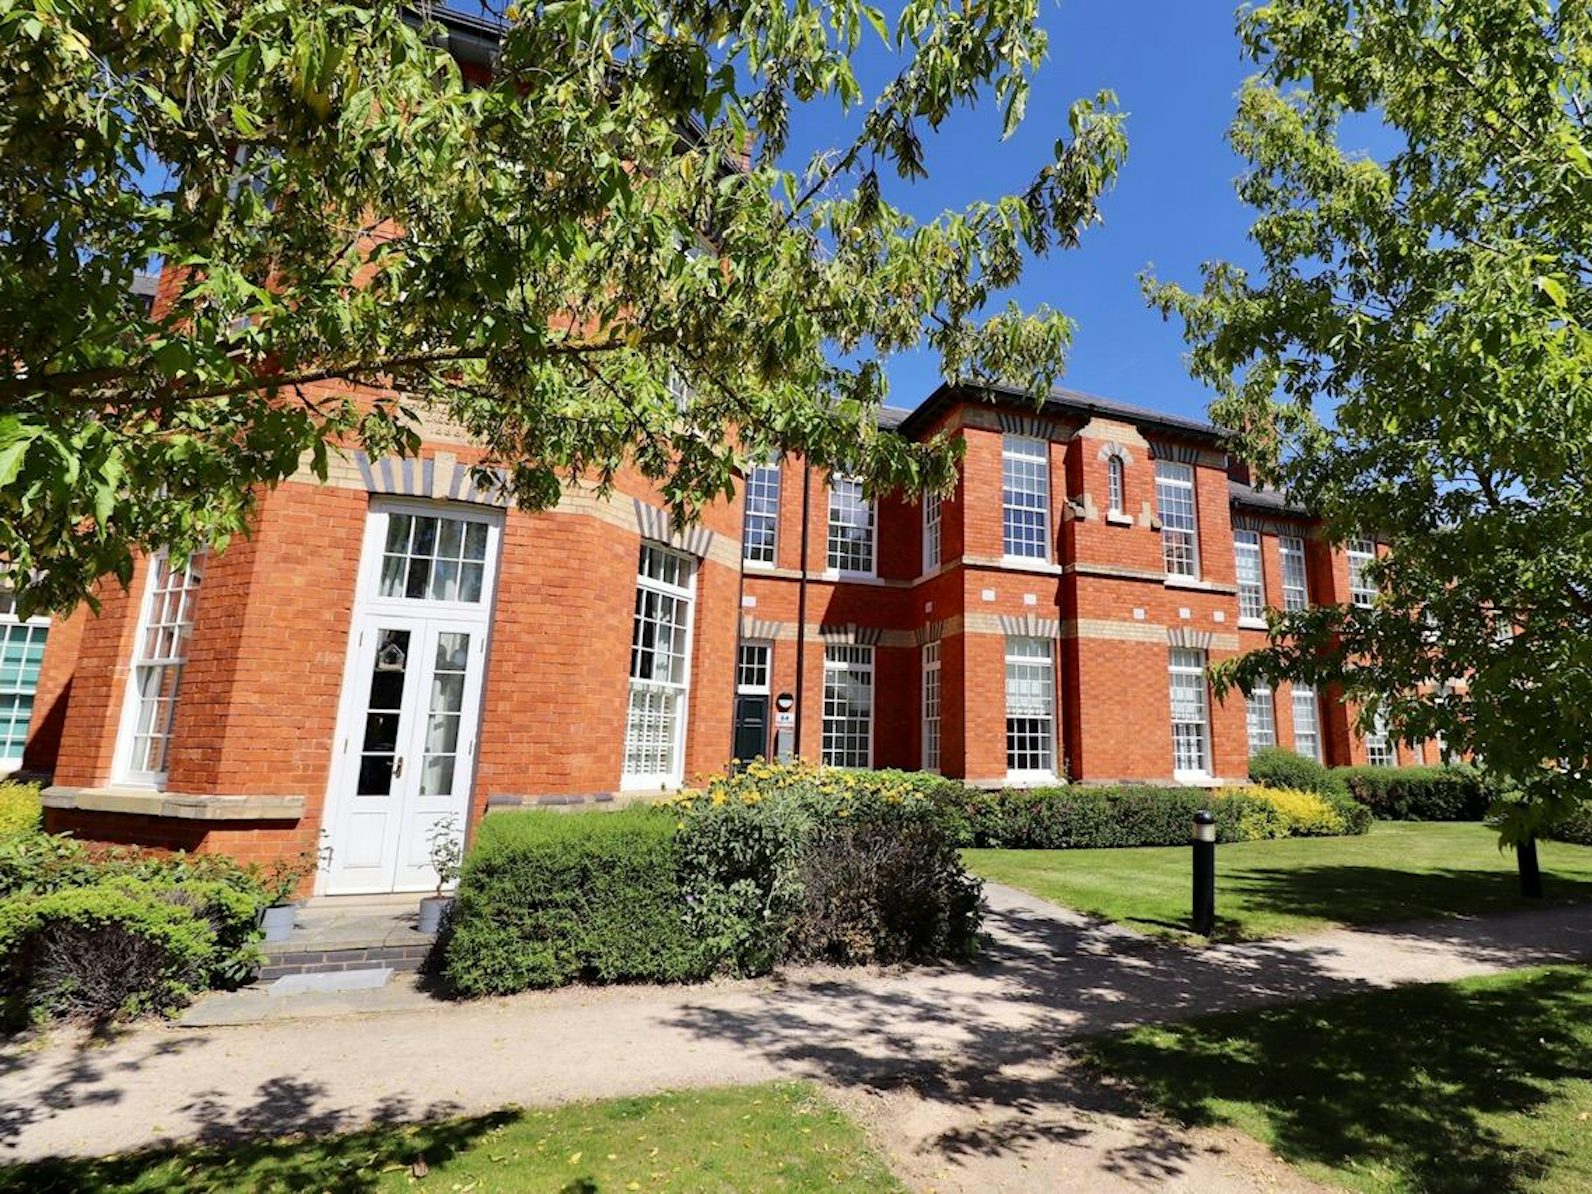 Flat for sale on South Meadow Road Northampton, NN5